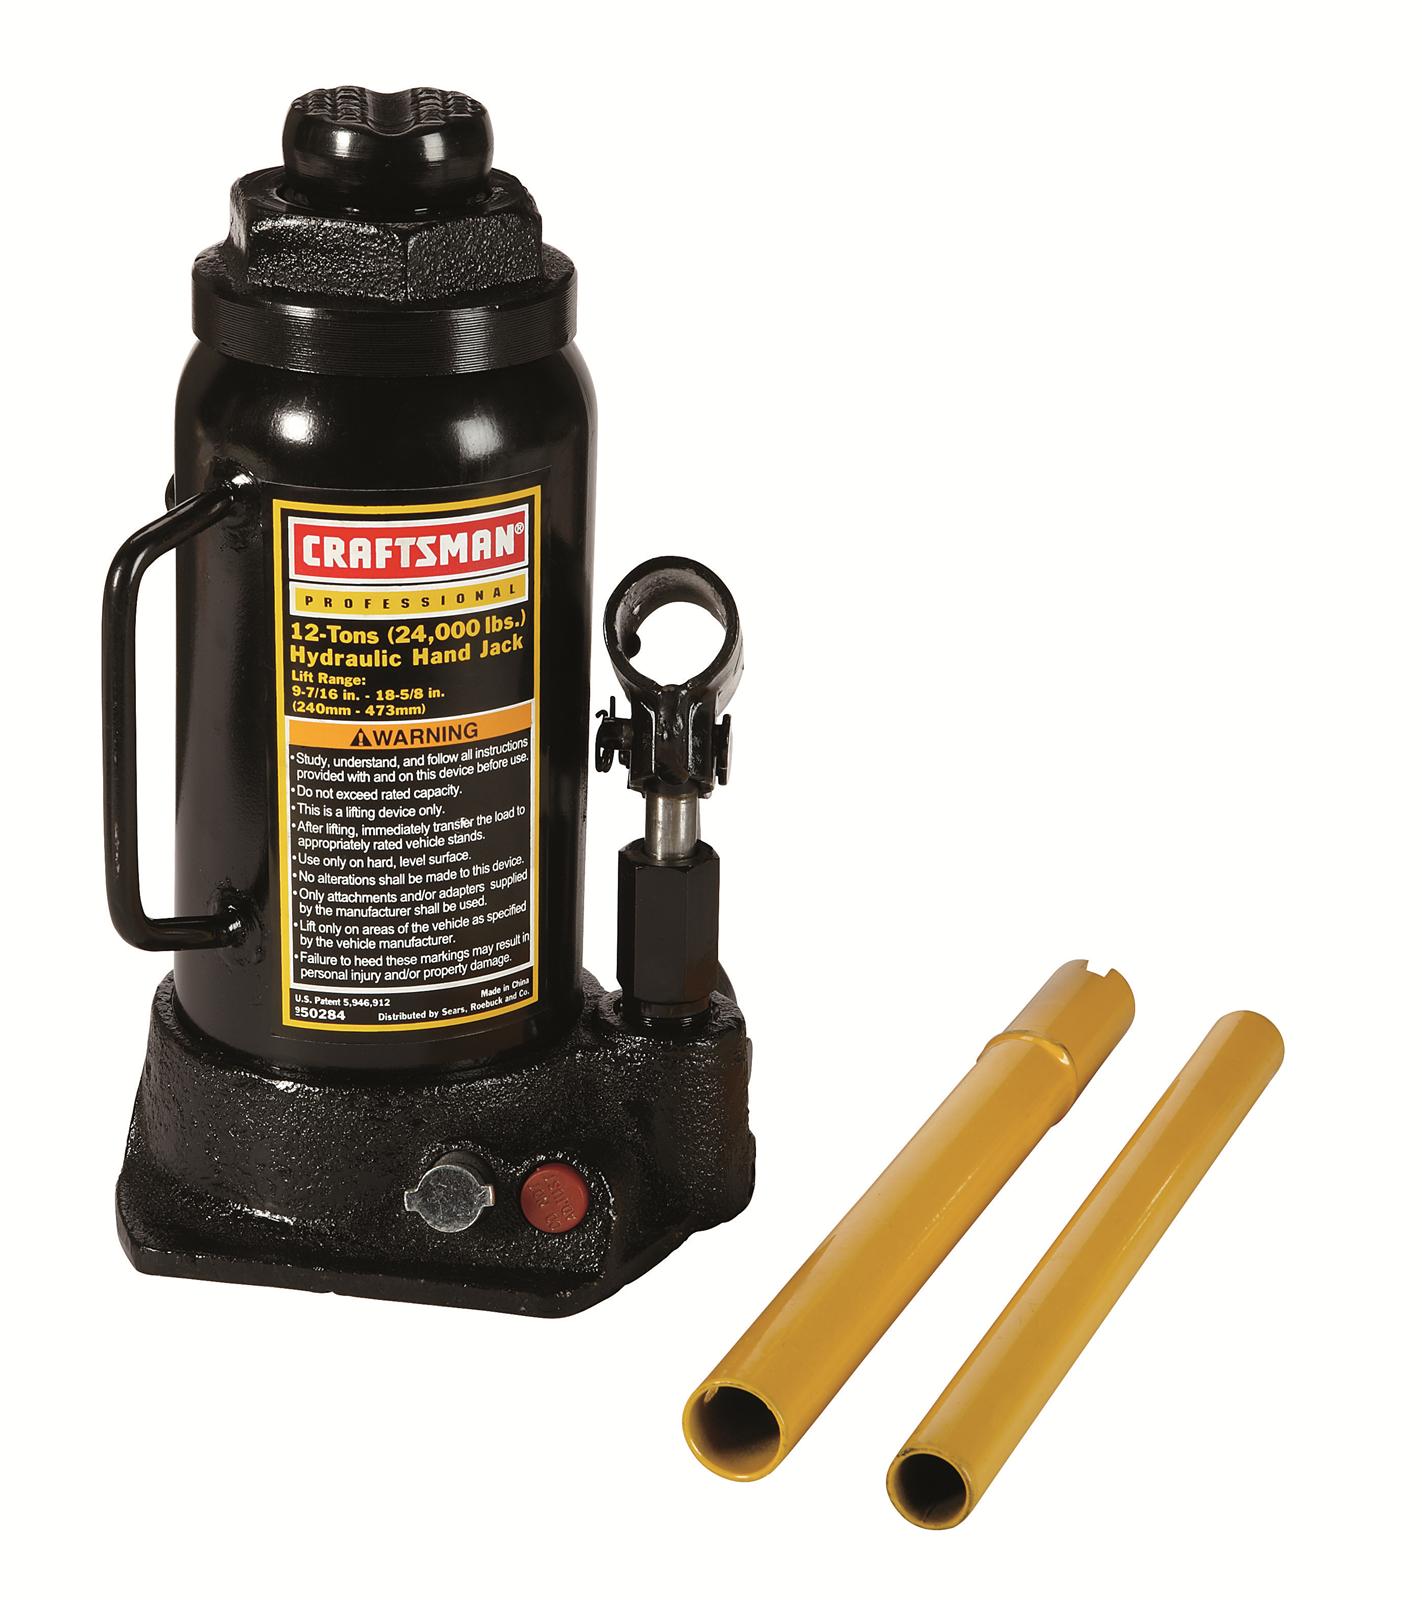 Craftsman Hydraulic Jack 20 Ton Capacity Wide Stance Compact Bottle Steel Black 